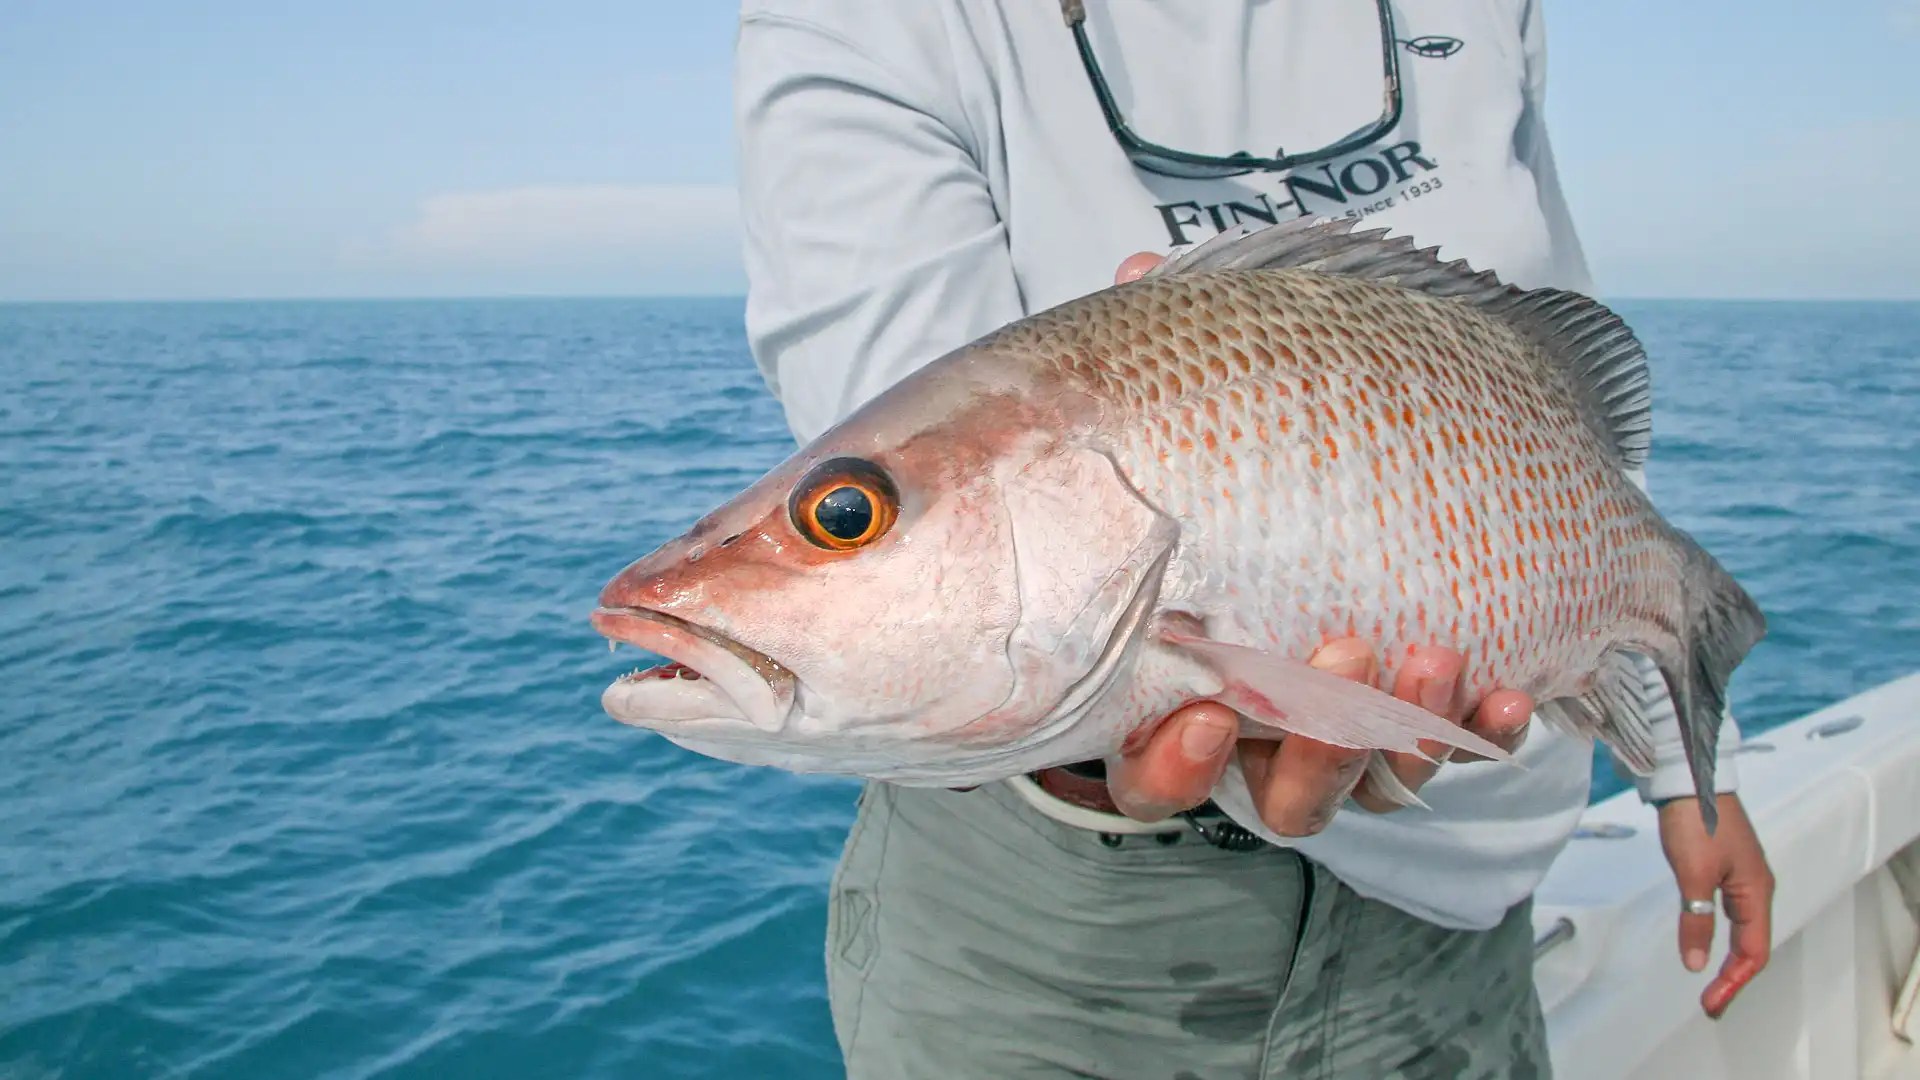 How to catch Mangrove Snapper